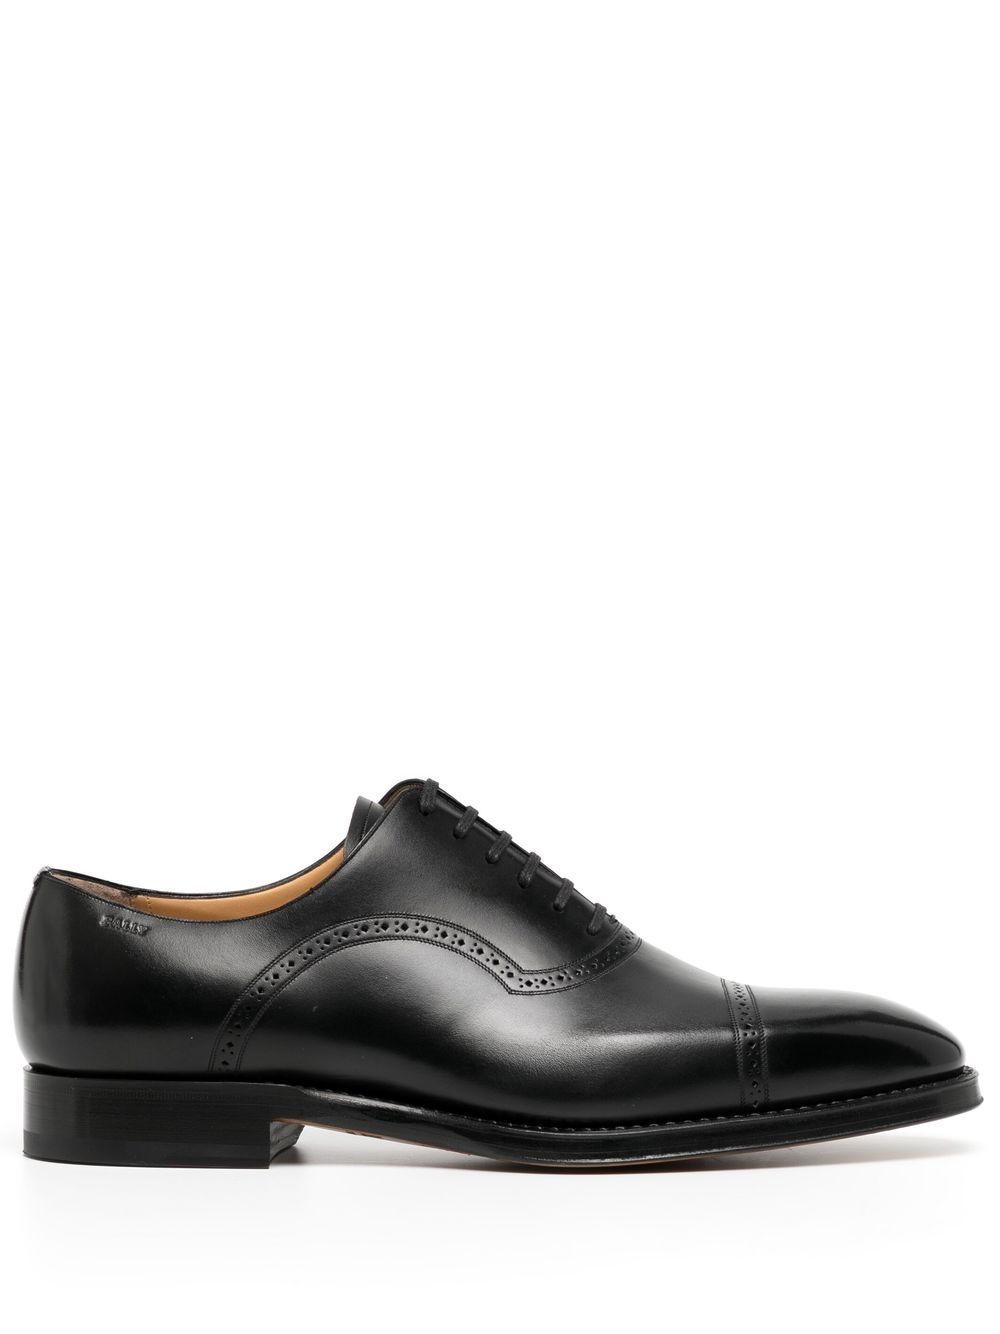 BALLY EMBOSSED-LOGO OXFORD SHOES